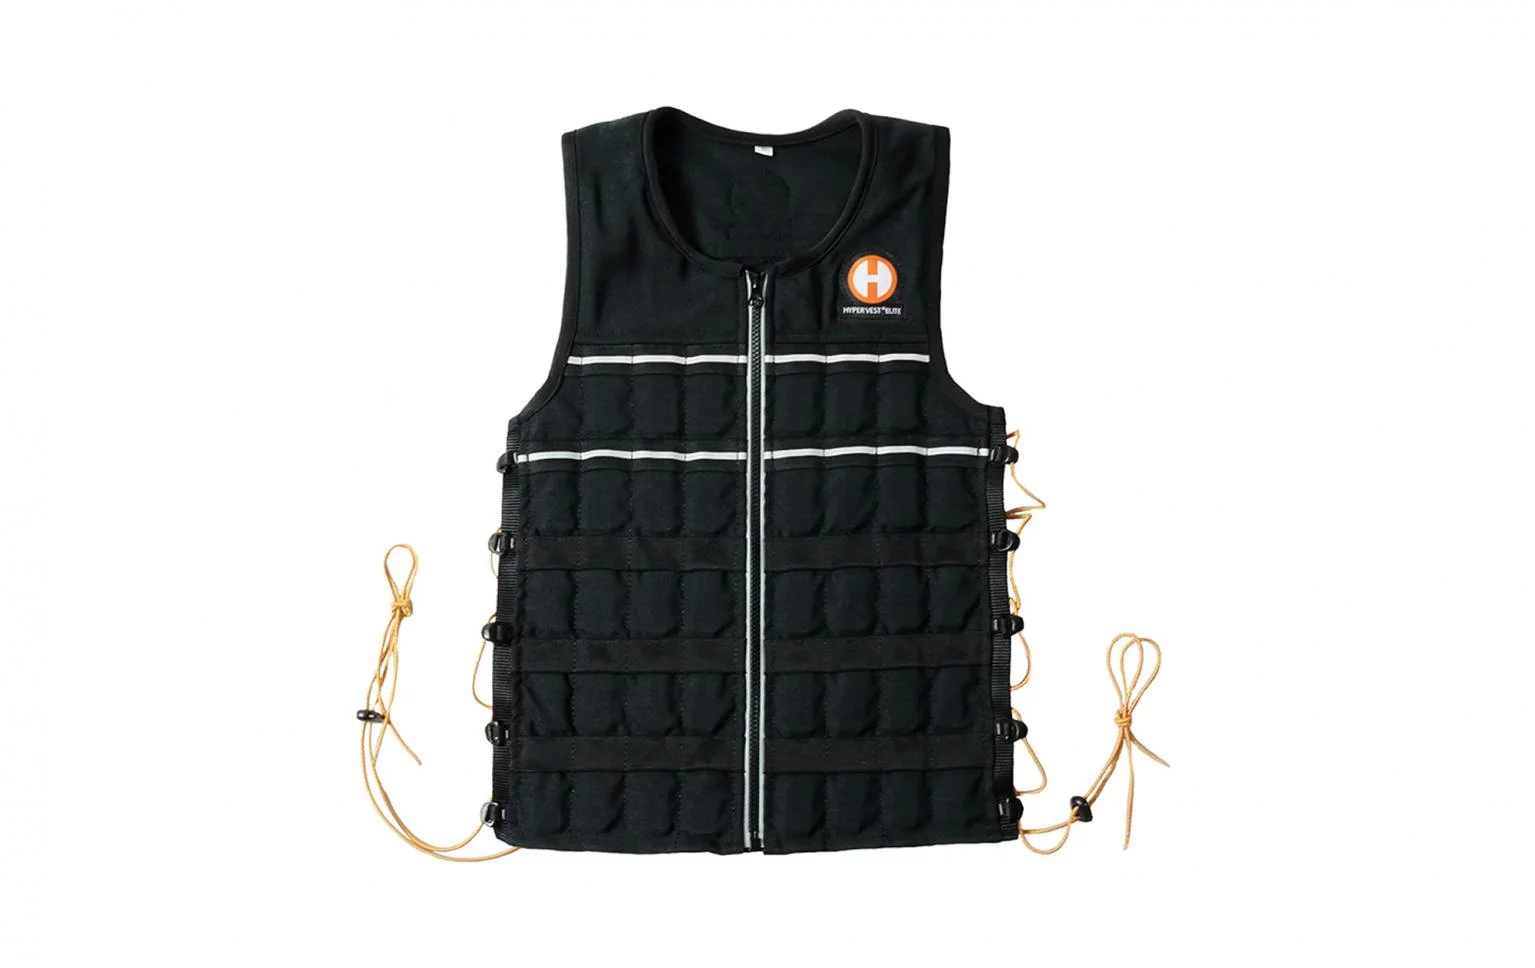 1387587 for sale online Abilitations Weighted 6 Pound Vest 39 X 19 to 24 Inches Black Large 